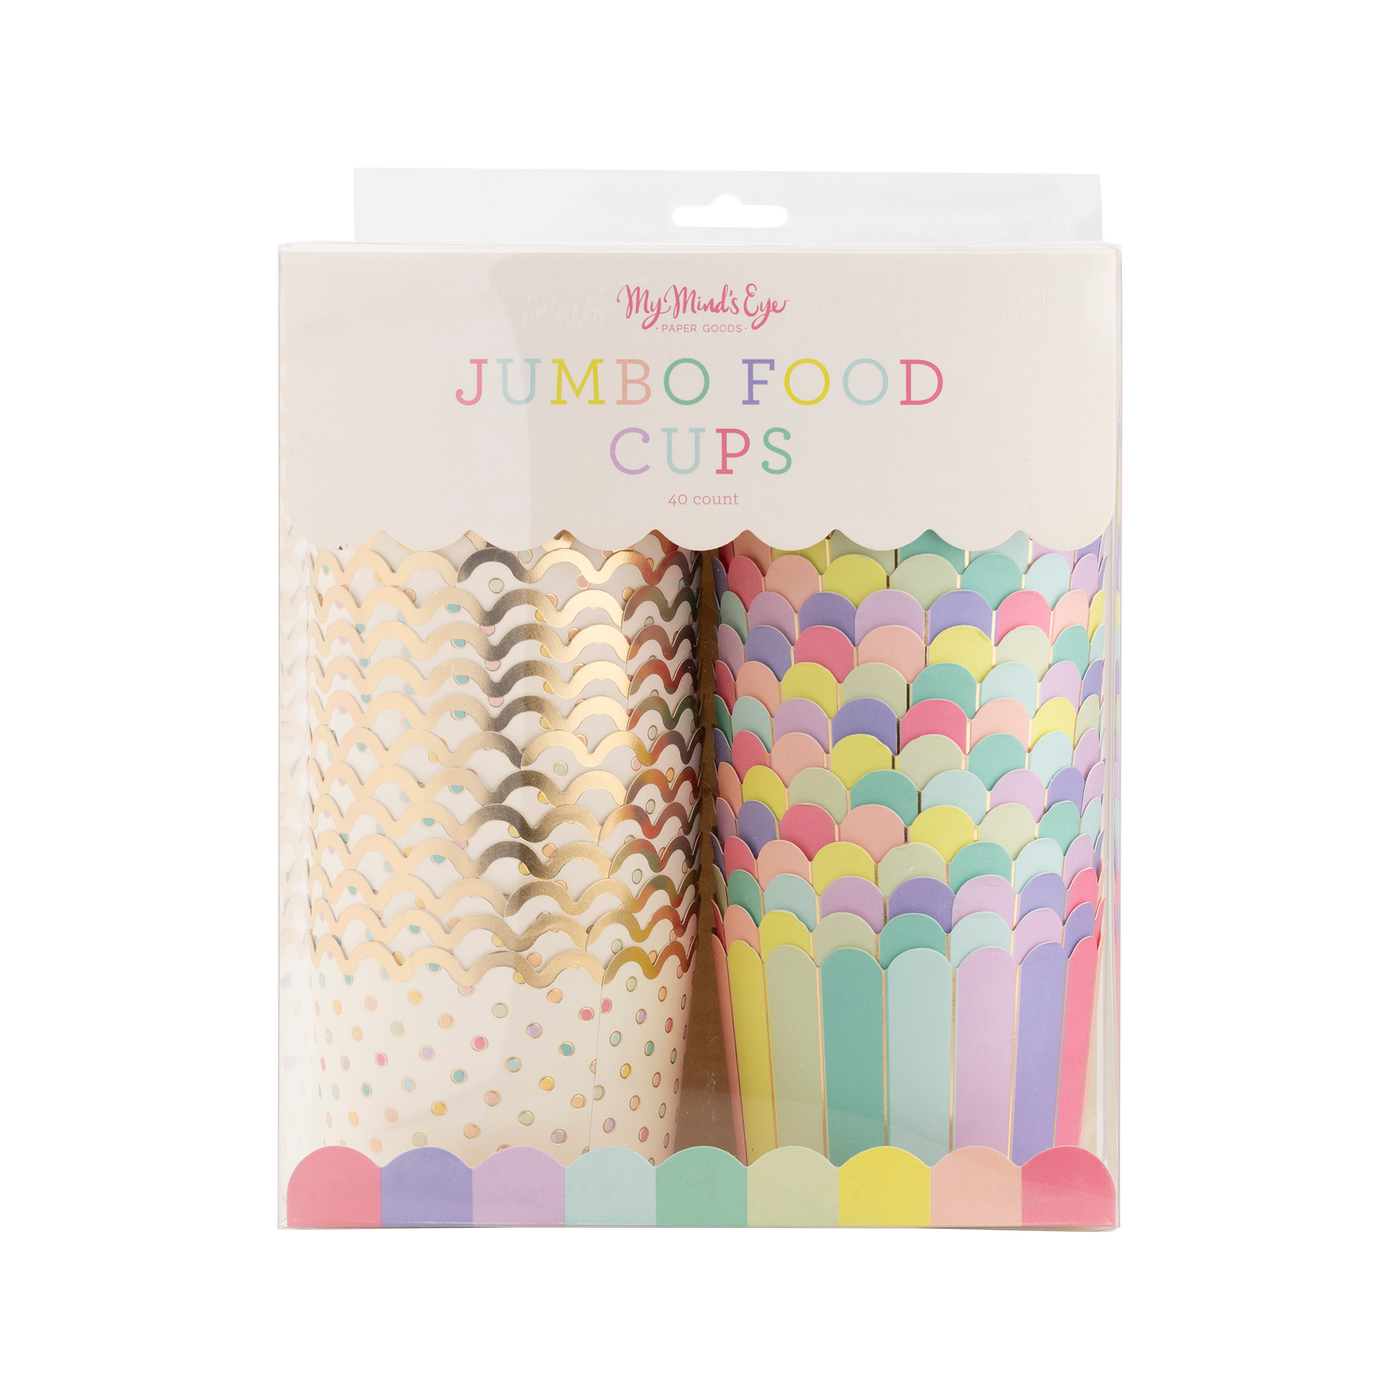 JUMBO Gold Foil Dots and Stripes (40ct)